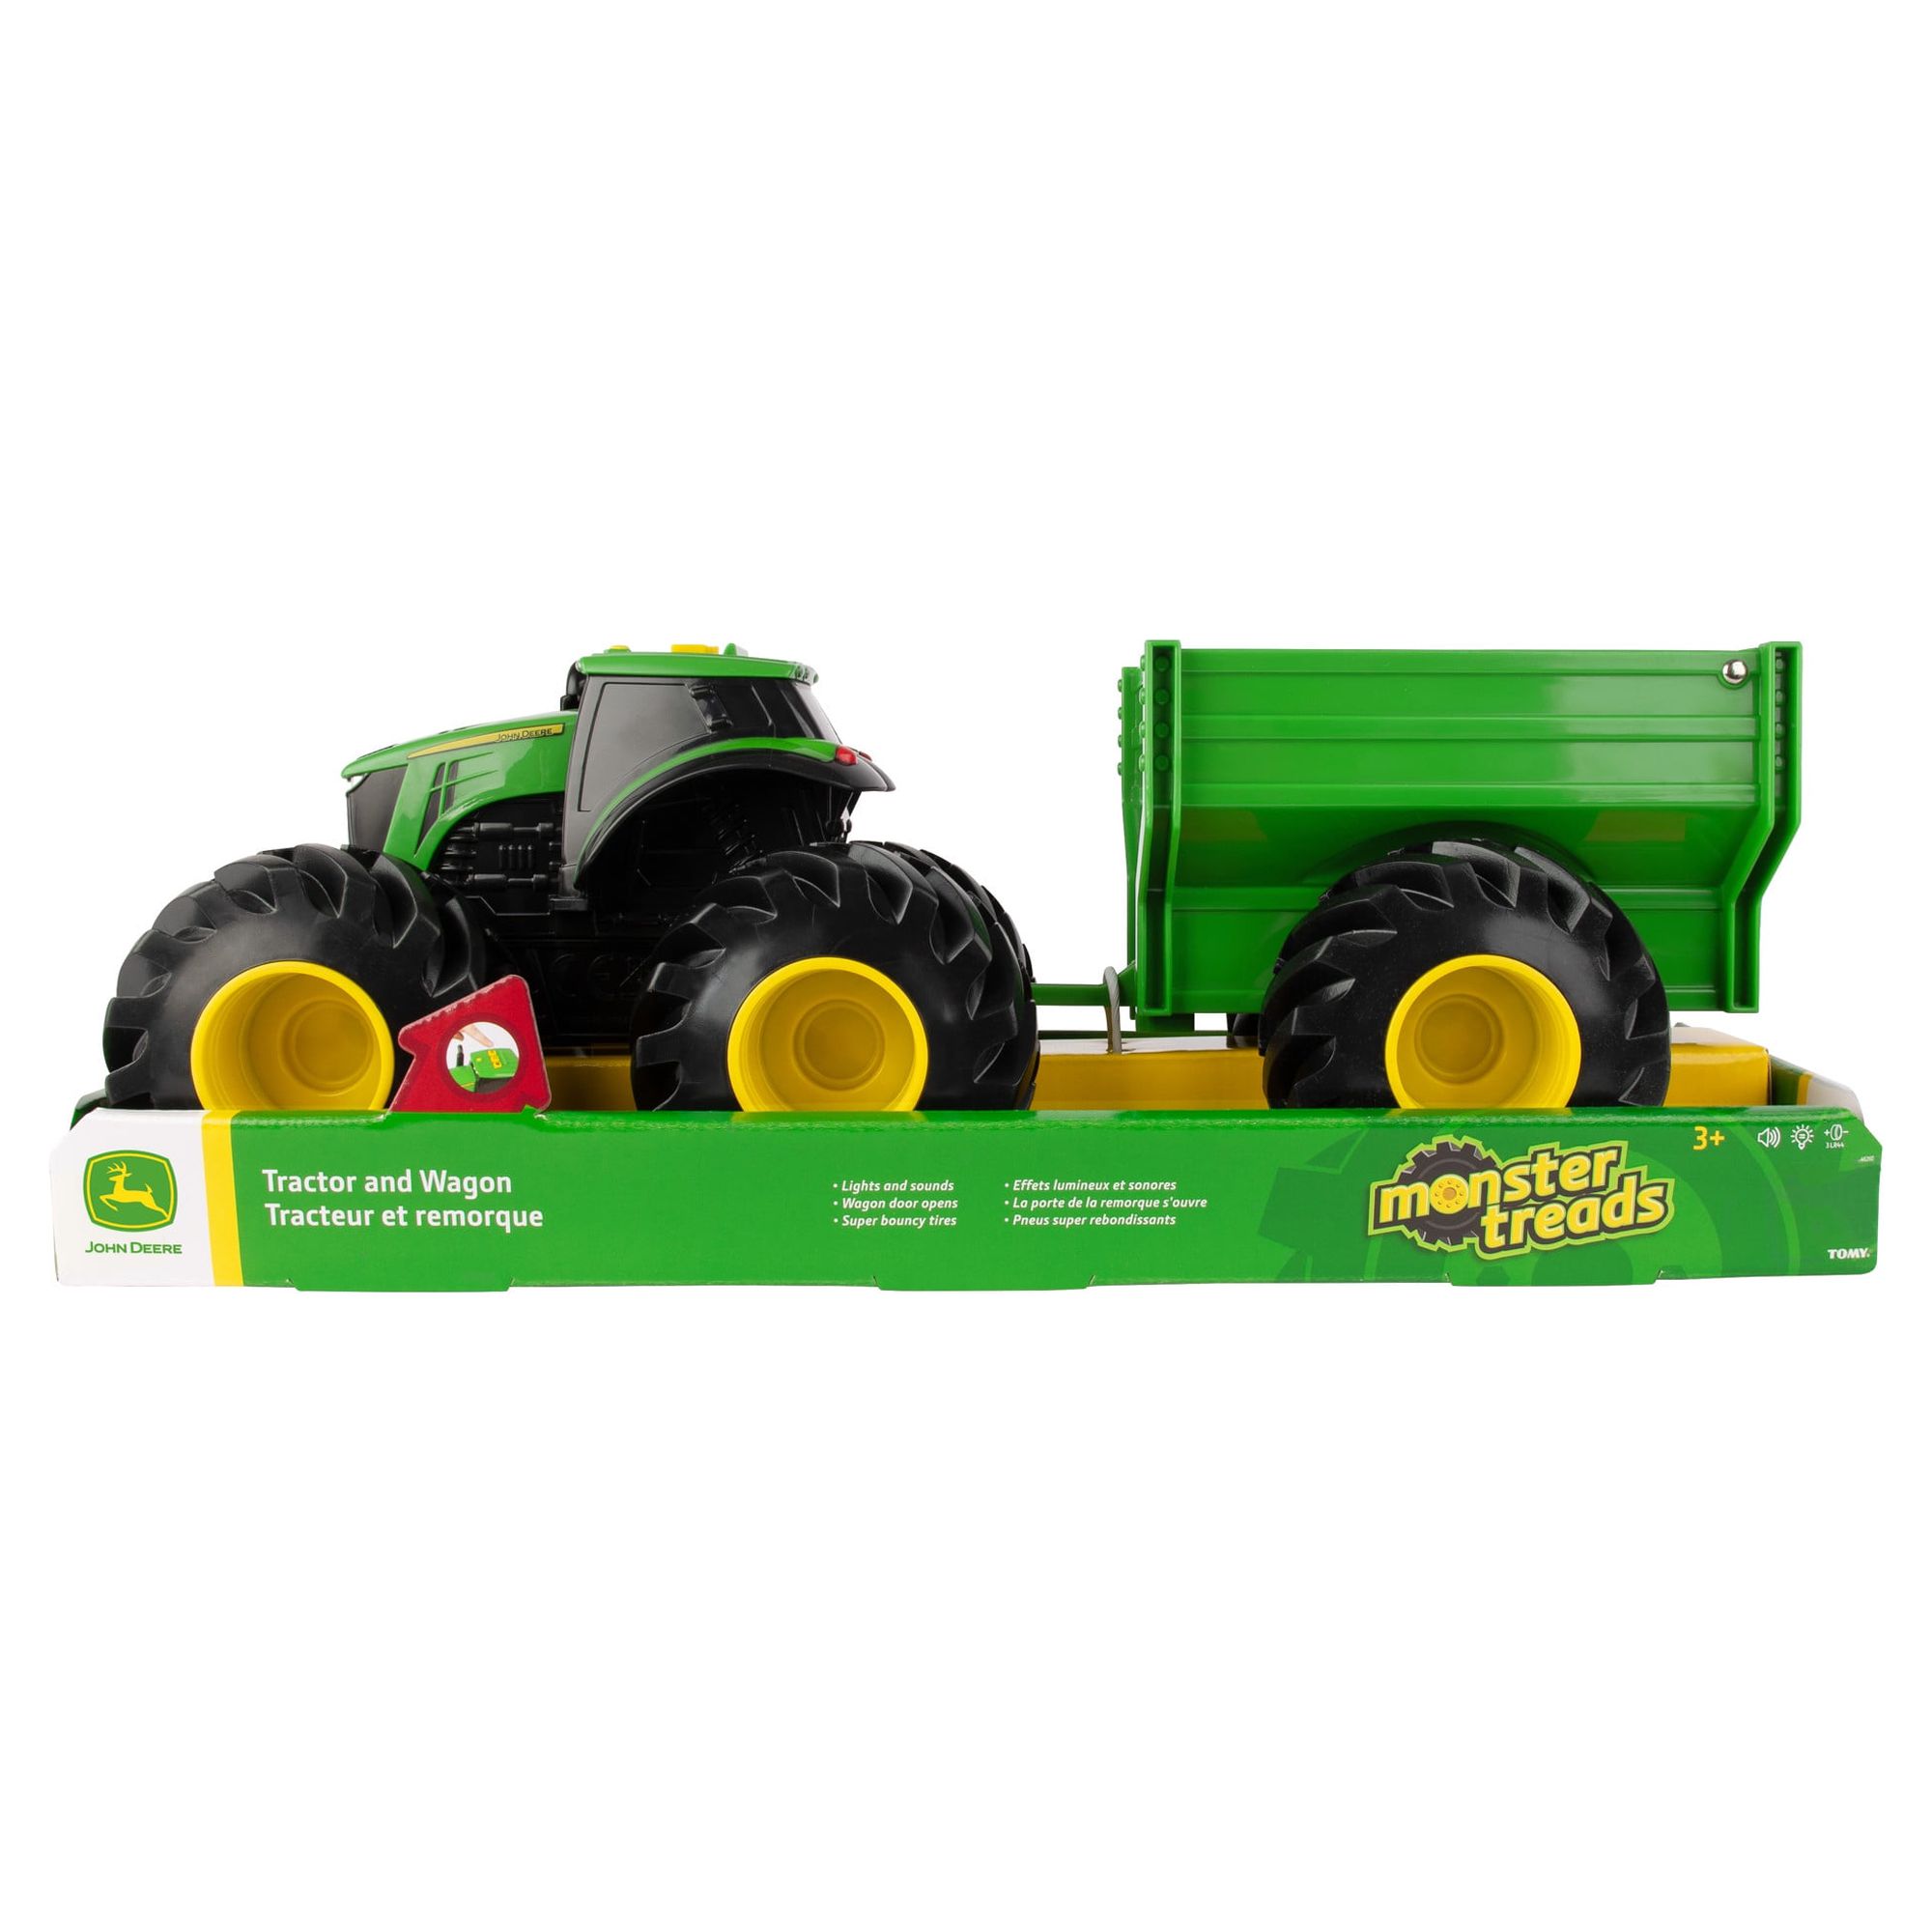 John Deere Monster Treads Lights & Sounds 8 inch Tractor with Wagon - image 9 of 9